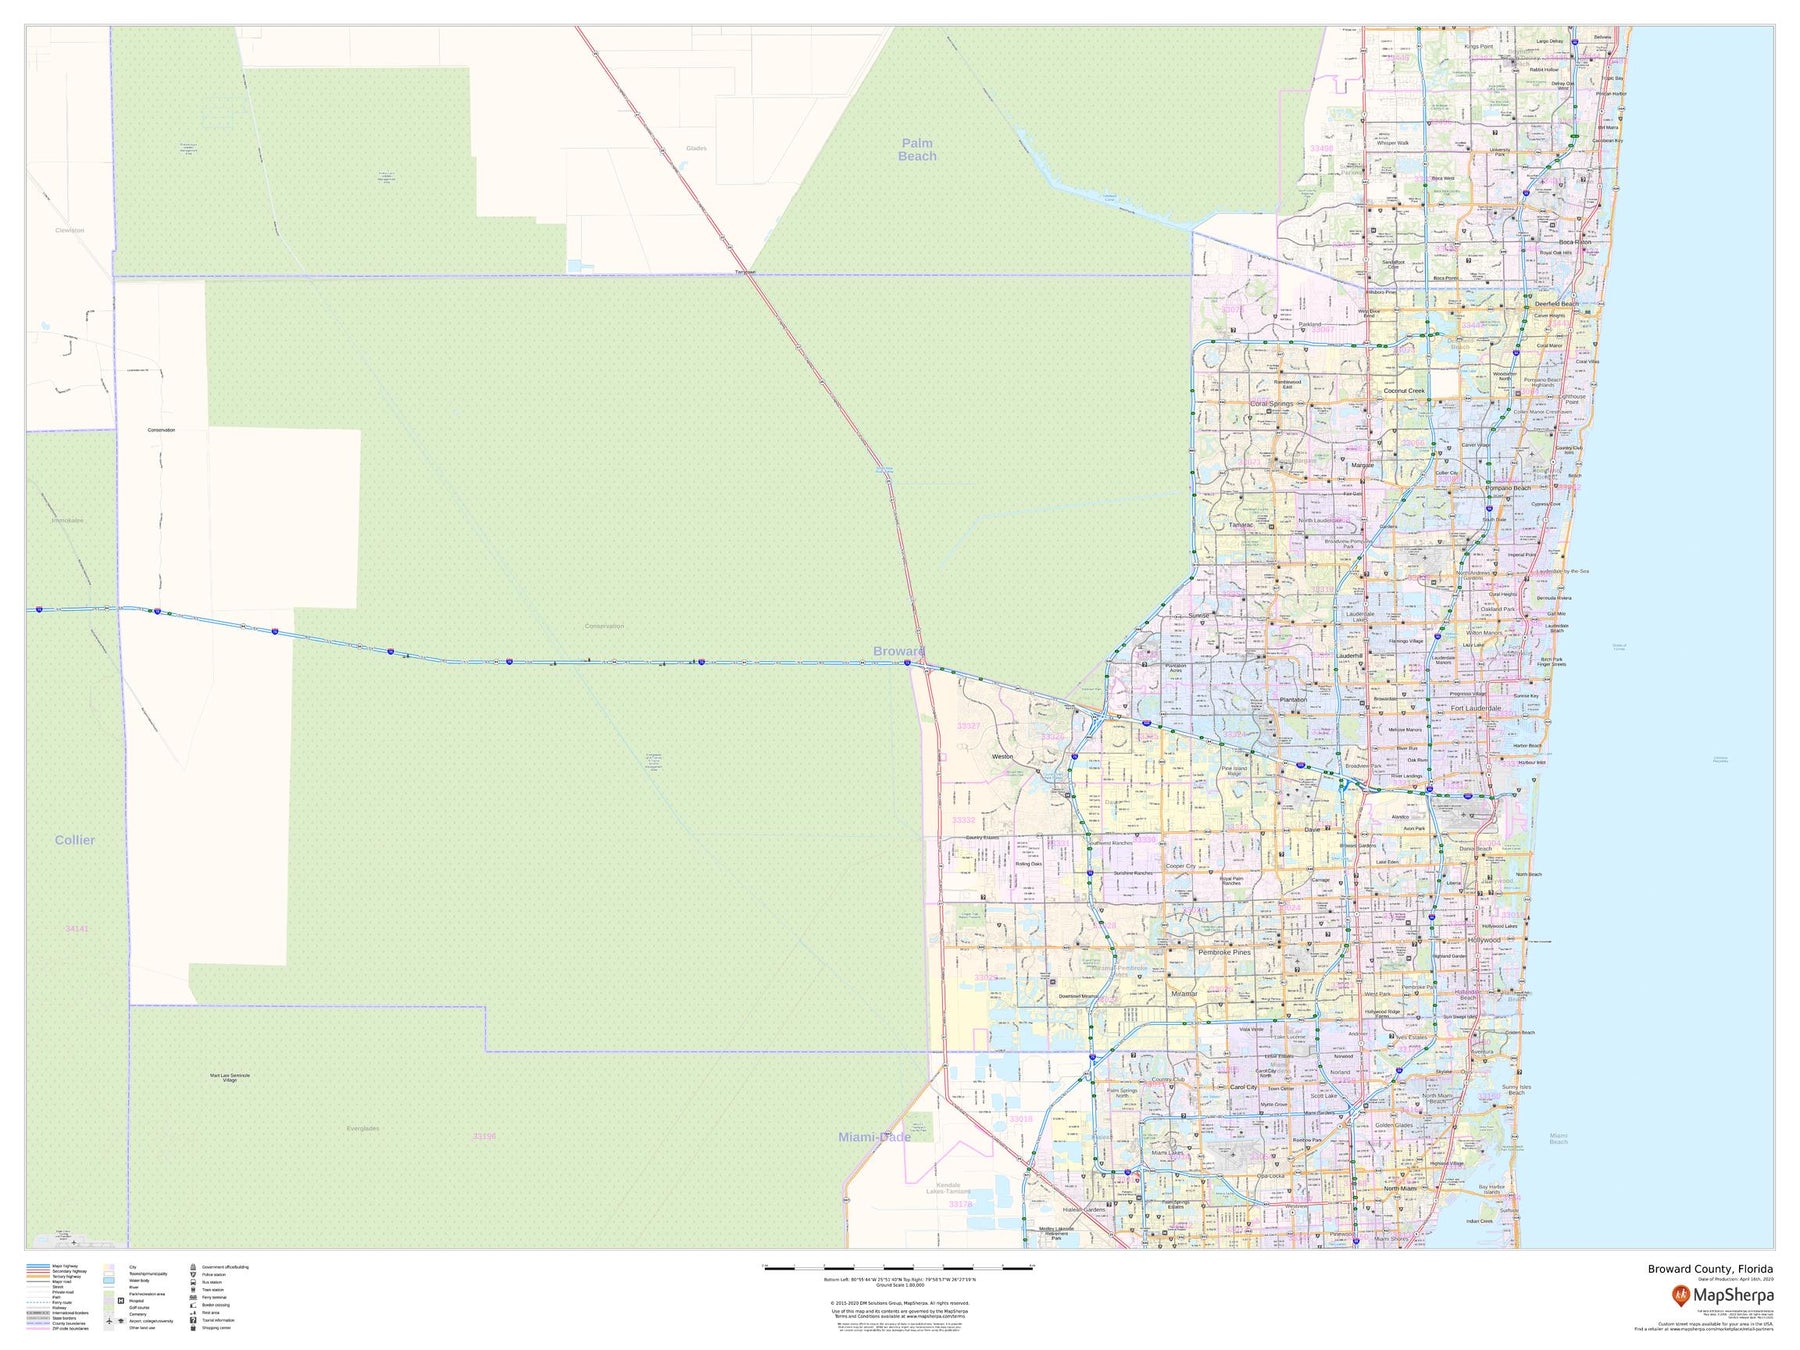 Map of Florida (USA) and inset map of Hillsborough County showing the